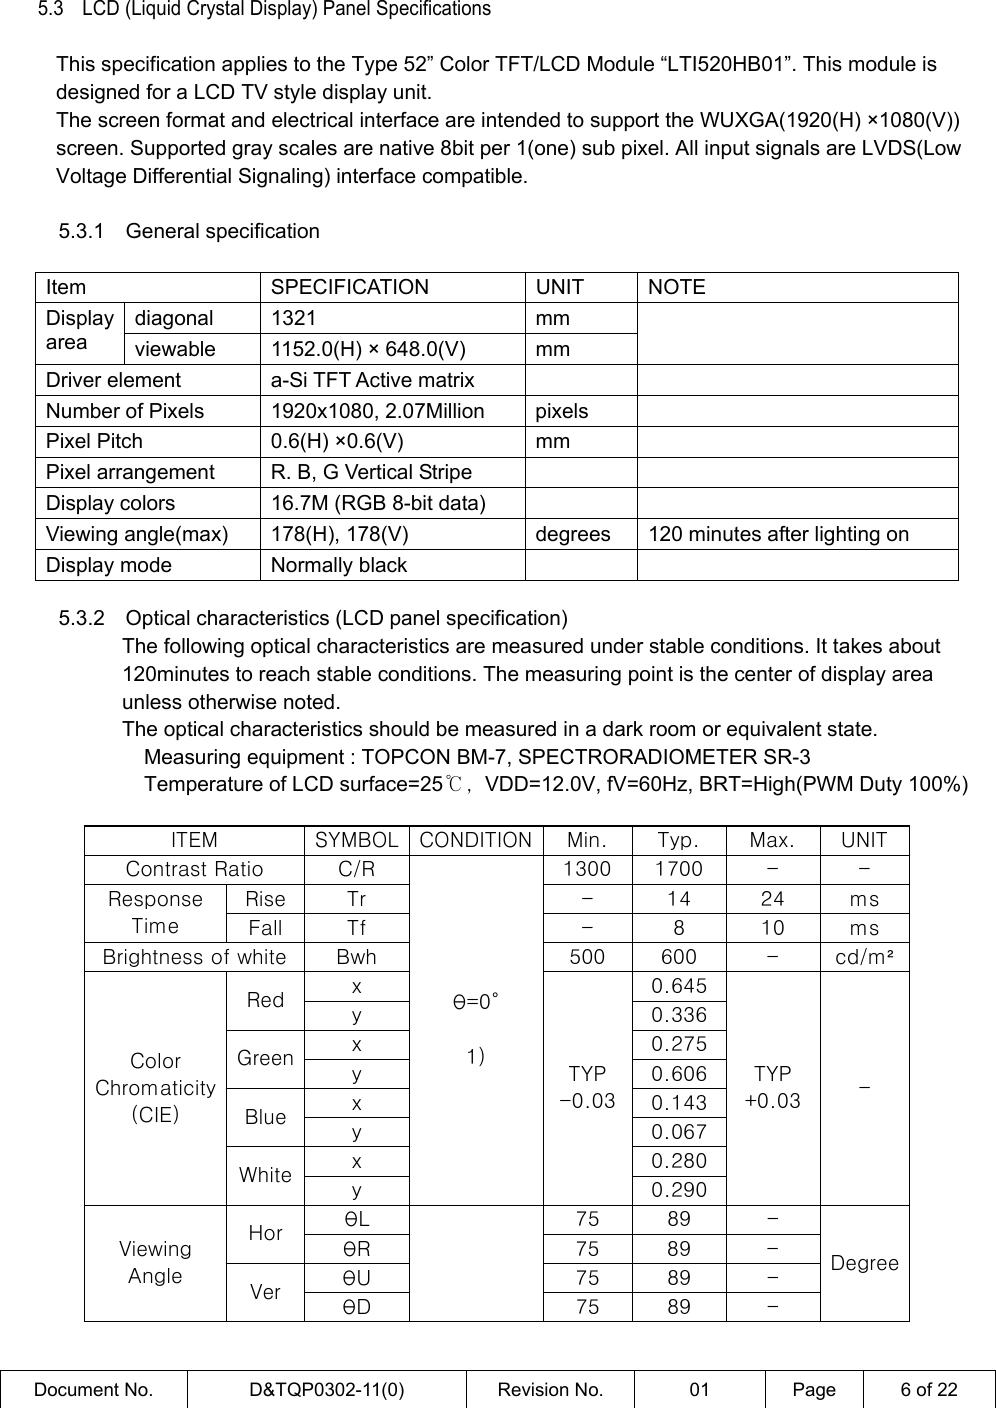  Document No.  D&amp;TQP0302-11(0)  Revision No.  01  Page  6 of 22    5.3    LCD (Liquid Crystal Display) Panel Specifications    This specification applies to the Type 52” Color TFT/LCD Module “LTI520HB01”. This module is designed for a LCD TV style display unit. The screen format and electrical interface are intended to support the WUXGA(1920(H) ×1080(V)) screen. Supported gray scales are native 8bit per 1(one) sub pixel. All input signals are LVDS(Low Voltage Differential Signaling) interface compatible.       5.3.1  General specification  Item SPECIFICATION UNIT NOTE diagonal   1321  mm Display area  viewable 1152.0(H) × 648.0(V)  mm  Driver element  a-Si TFT Active matrix     Number of Pixels  1920x1080, 2.07Million  pixels   Pixel Pitch  0.6(H) ×0.6(V)    mm   Pixel arrangement  R. B, G Vertical Stripe     Display colors  16.7M (RGB 8-bit data)     Viewing angle(max)  178(H), 178(V)  degrees  120 minutes after lighting on Display mode  Normally black          5.3.2  Optical characteristics (LCD panel specification)   The following optical characteristics are measured under stable conditions. It takes about 120minutes to reach stable conditions. The measuring point is the center of display area unless otherwise noted.   The optical characteristics should be measured in a dark room or equivalent state. Measuring equipment : TOPCON BM-7, SPECTRORADIOMETER SR-3 Temperature of LCD surface=25℃, VDD=12.0V, fV=60Hz, BRT=High(PWM Duty 100%)  ITEM  SYMBOL  CONDITION Min.  Typ.  Max.  UNIT Contrast Ratio  C/R  1300  1700  -  - Rise  Tr  -  14  24  ms Response Time  Fall  Tf  -  8  10  ms Brightness of white  Bwh  500  600  -  cd/m² x  0.645Red  y  0.336x  0.275Green  y  0.606x  0.143Blue  y  0.067x  0.280Color Chromaticity (CIE) White  y θ=0°  1)  TYP -0.030.290TYP +0.03  - θL  75  89  - Hor  θR  75  89  - θU  75  89  - Viewing Angle  Ver  θD  75  89  - Degree 